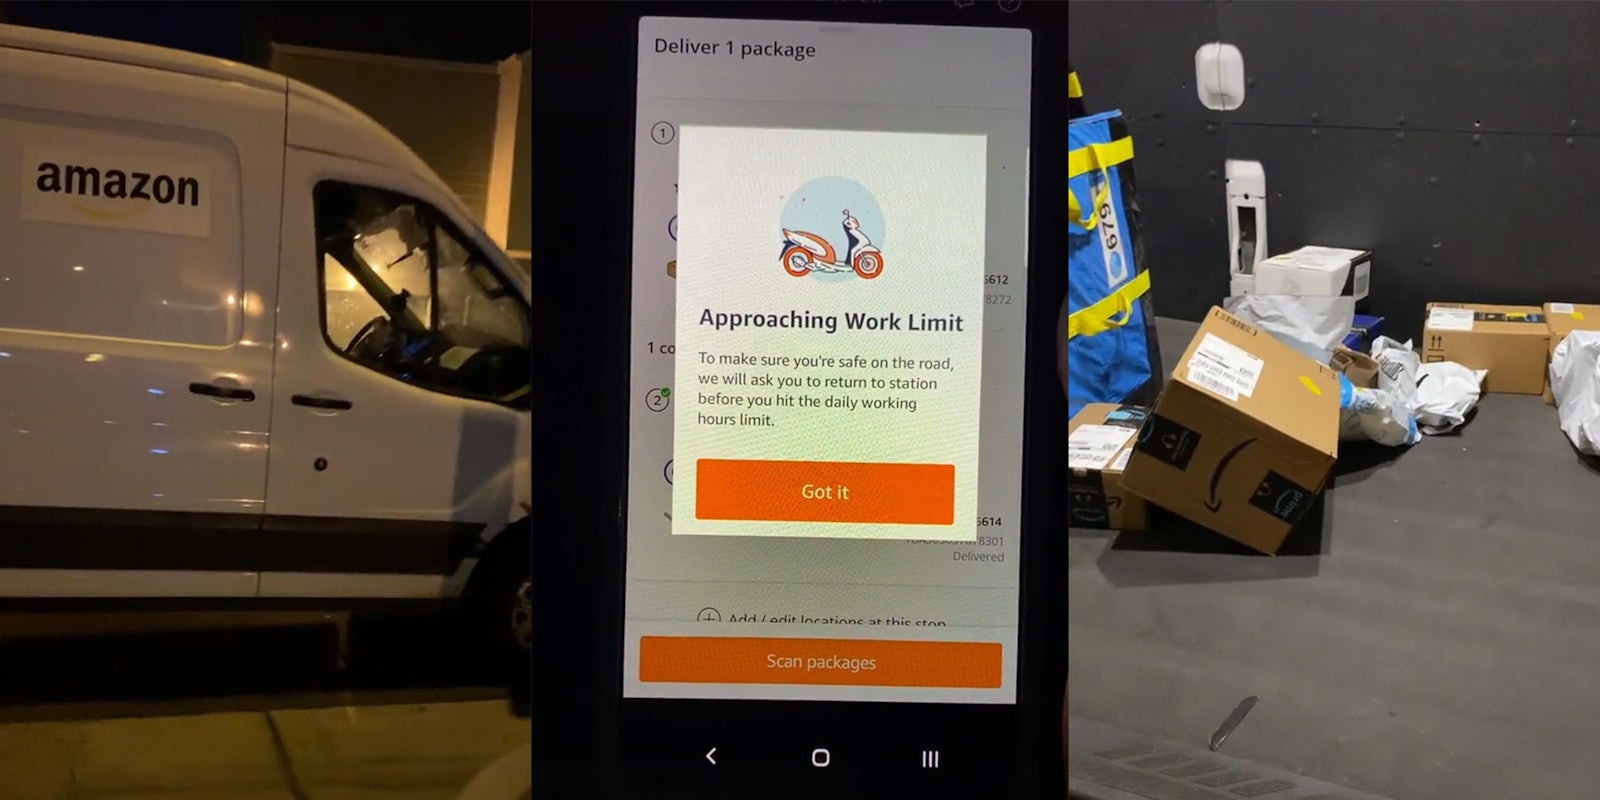 amazon delivery van (l) 'approaching work limit' warning screen on device (c) packages in back of Amazon van (r)